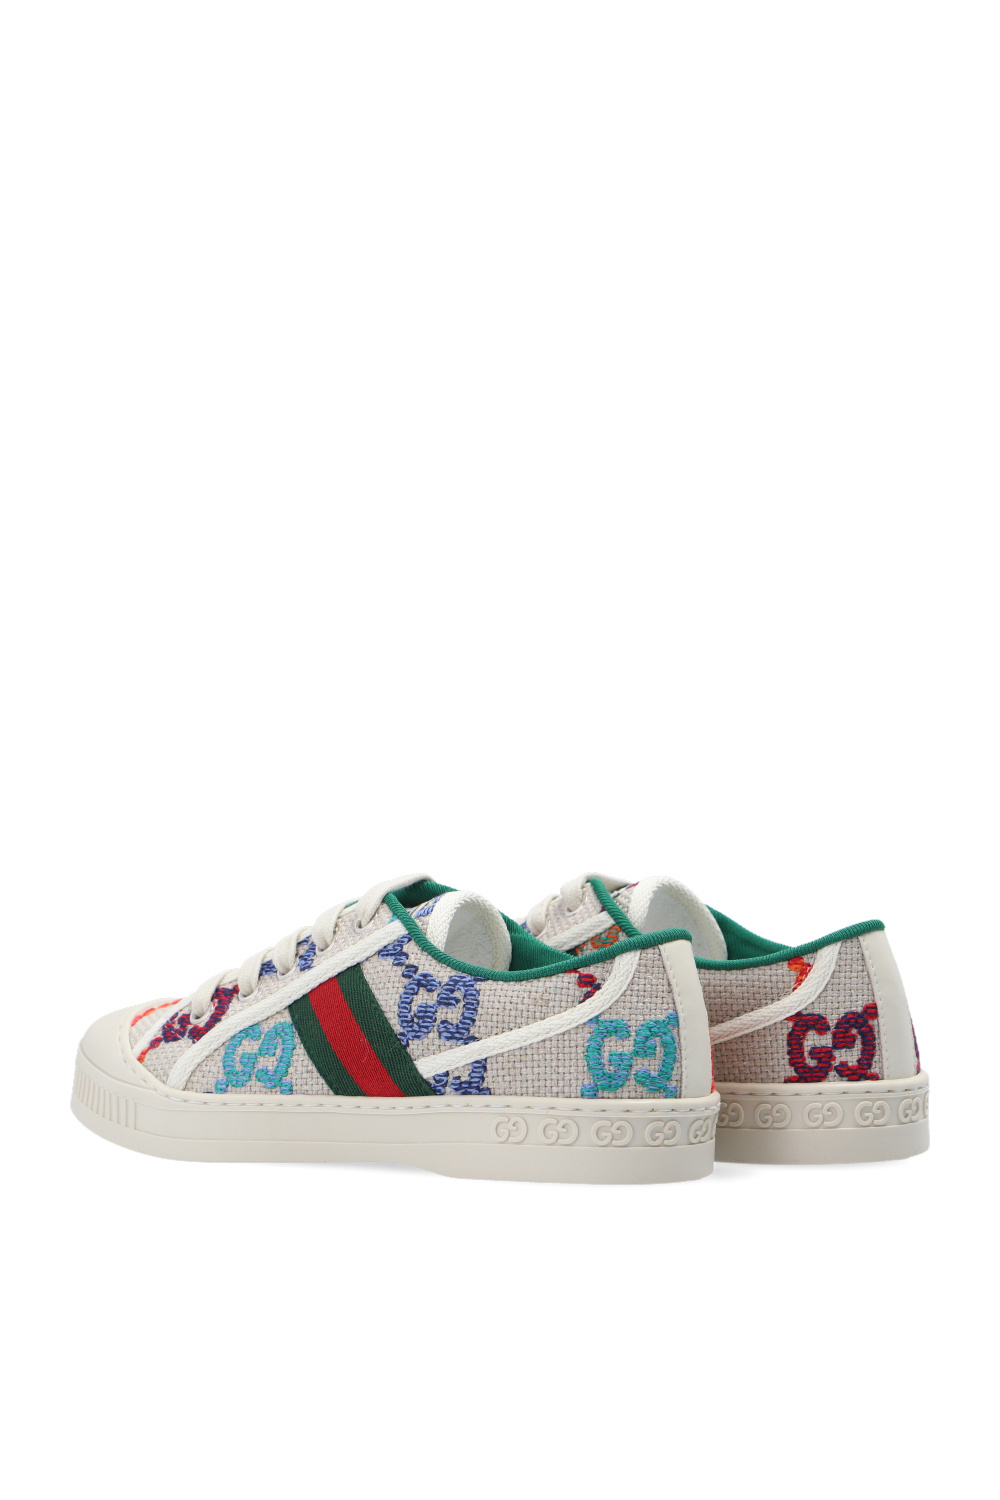 gucci that Kids ‘Tennis 1977’ sneakers